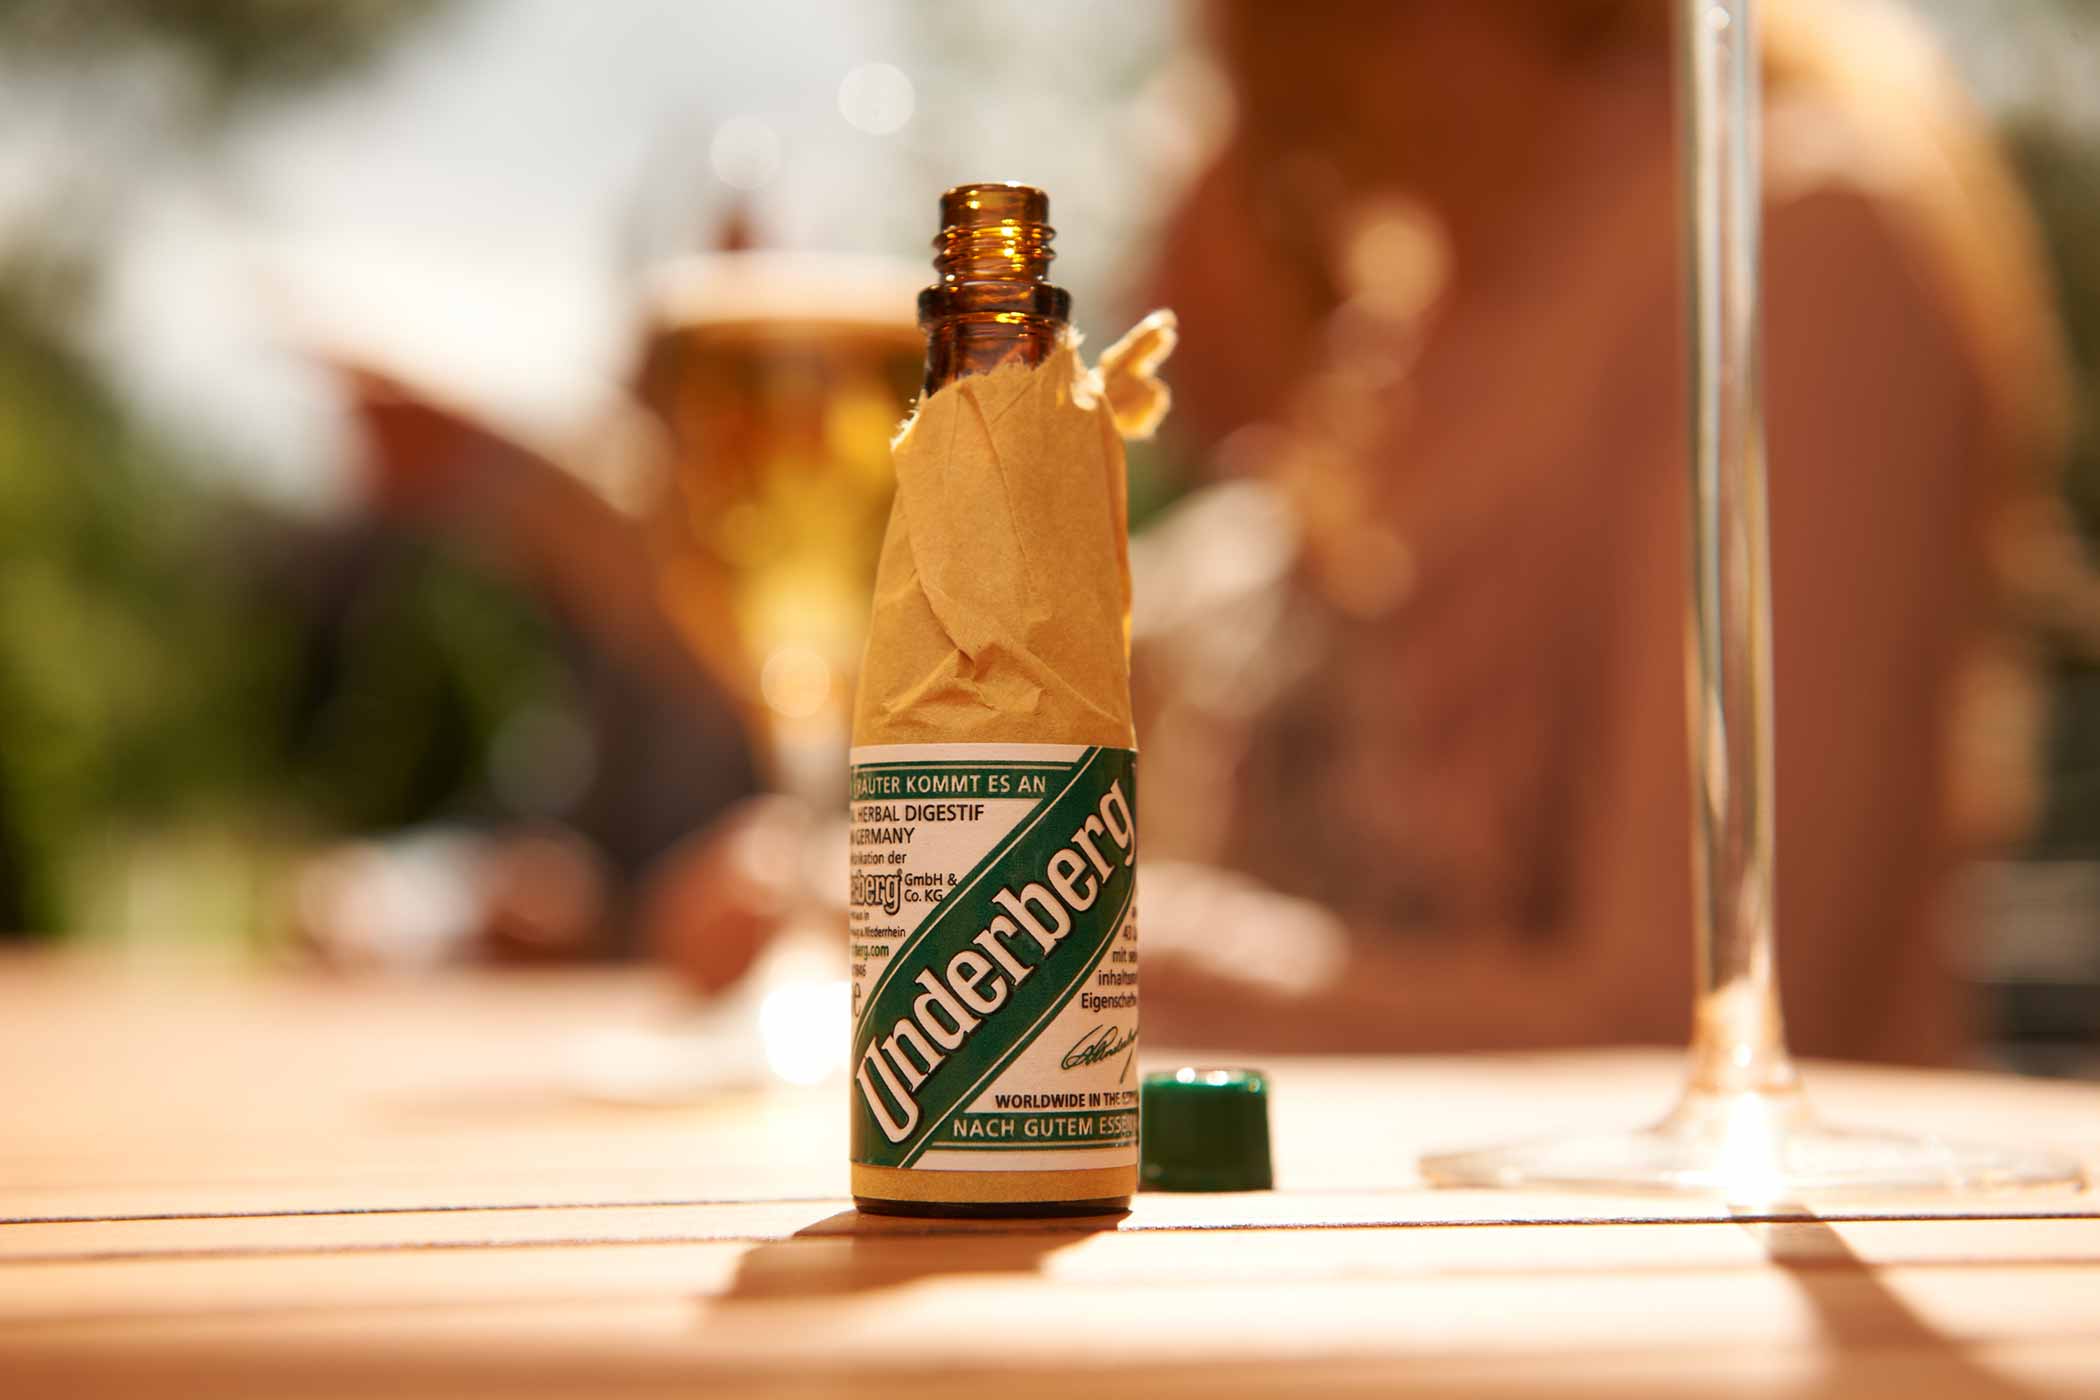 The Cult of Underberg: What Is in Those Tiny Brown Bottles?